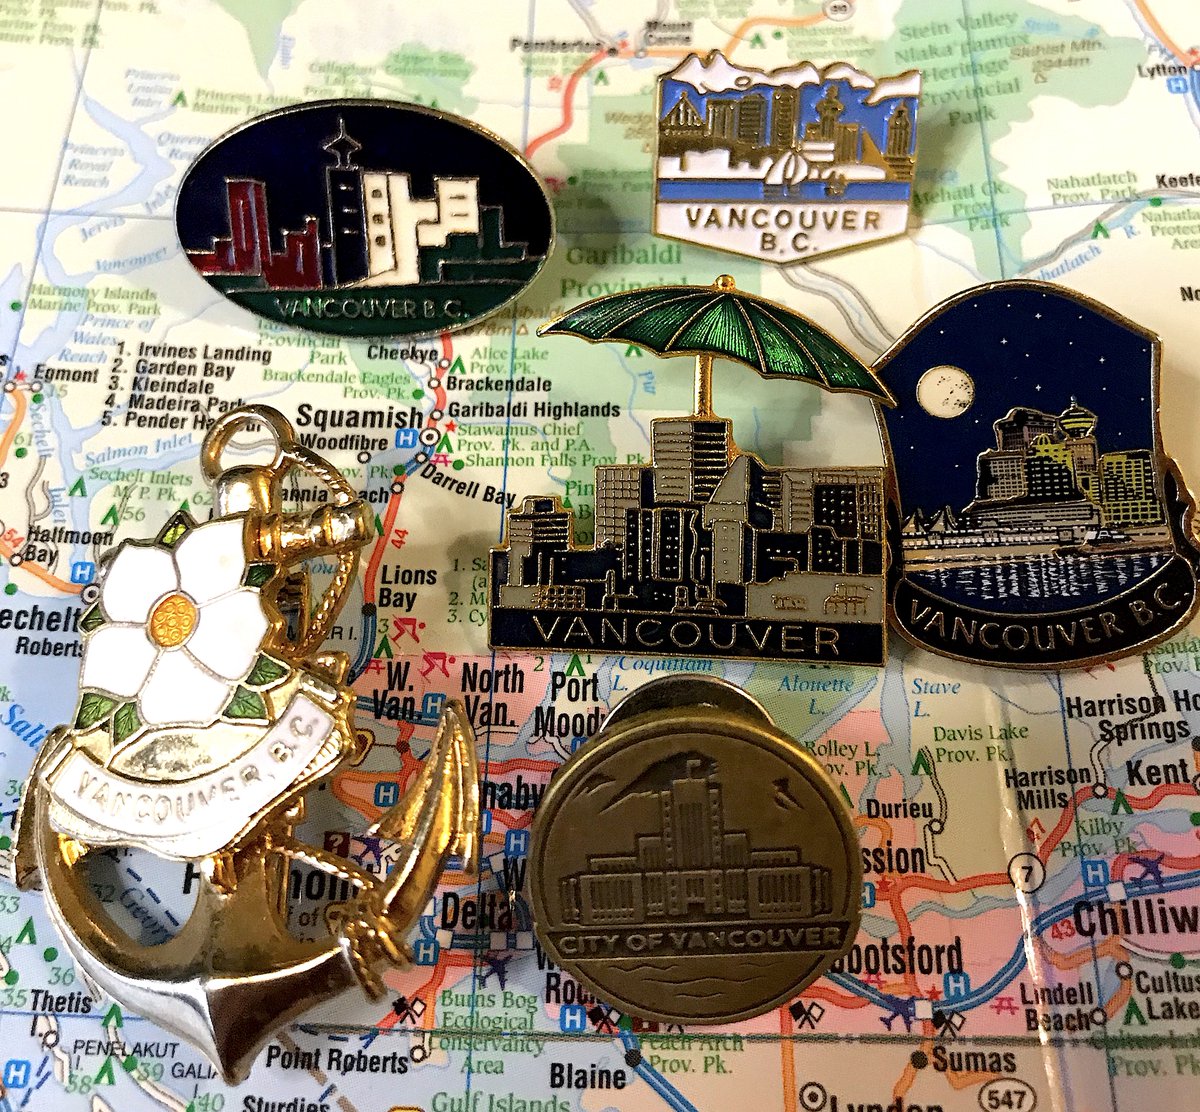 17. VANCOUVER - There are many Vancouver pins; most are quite good - None 100% excite me but maybe that's because I live here- Love how cool and 80s the first one is, delighted by the umbrella in the second- We need more pins with Science World instead of Harbour Centre